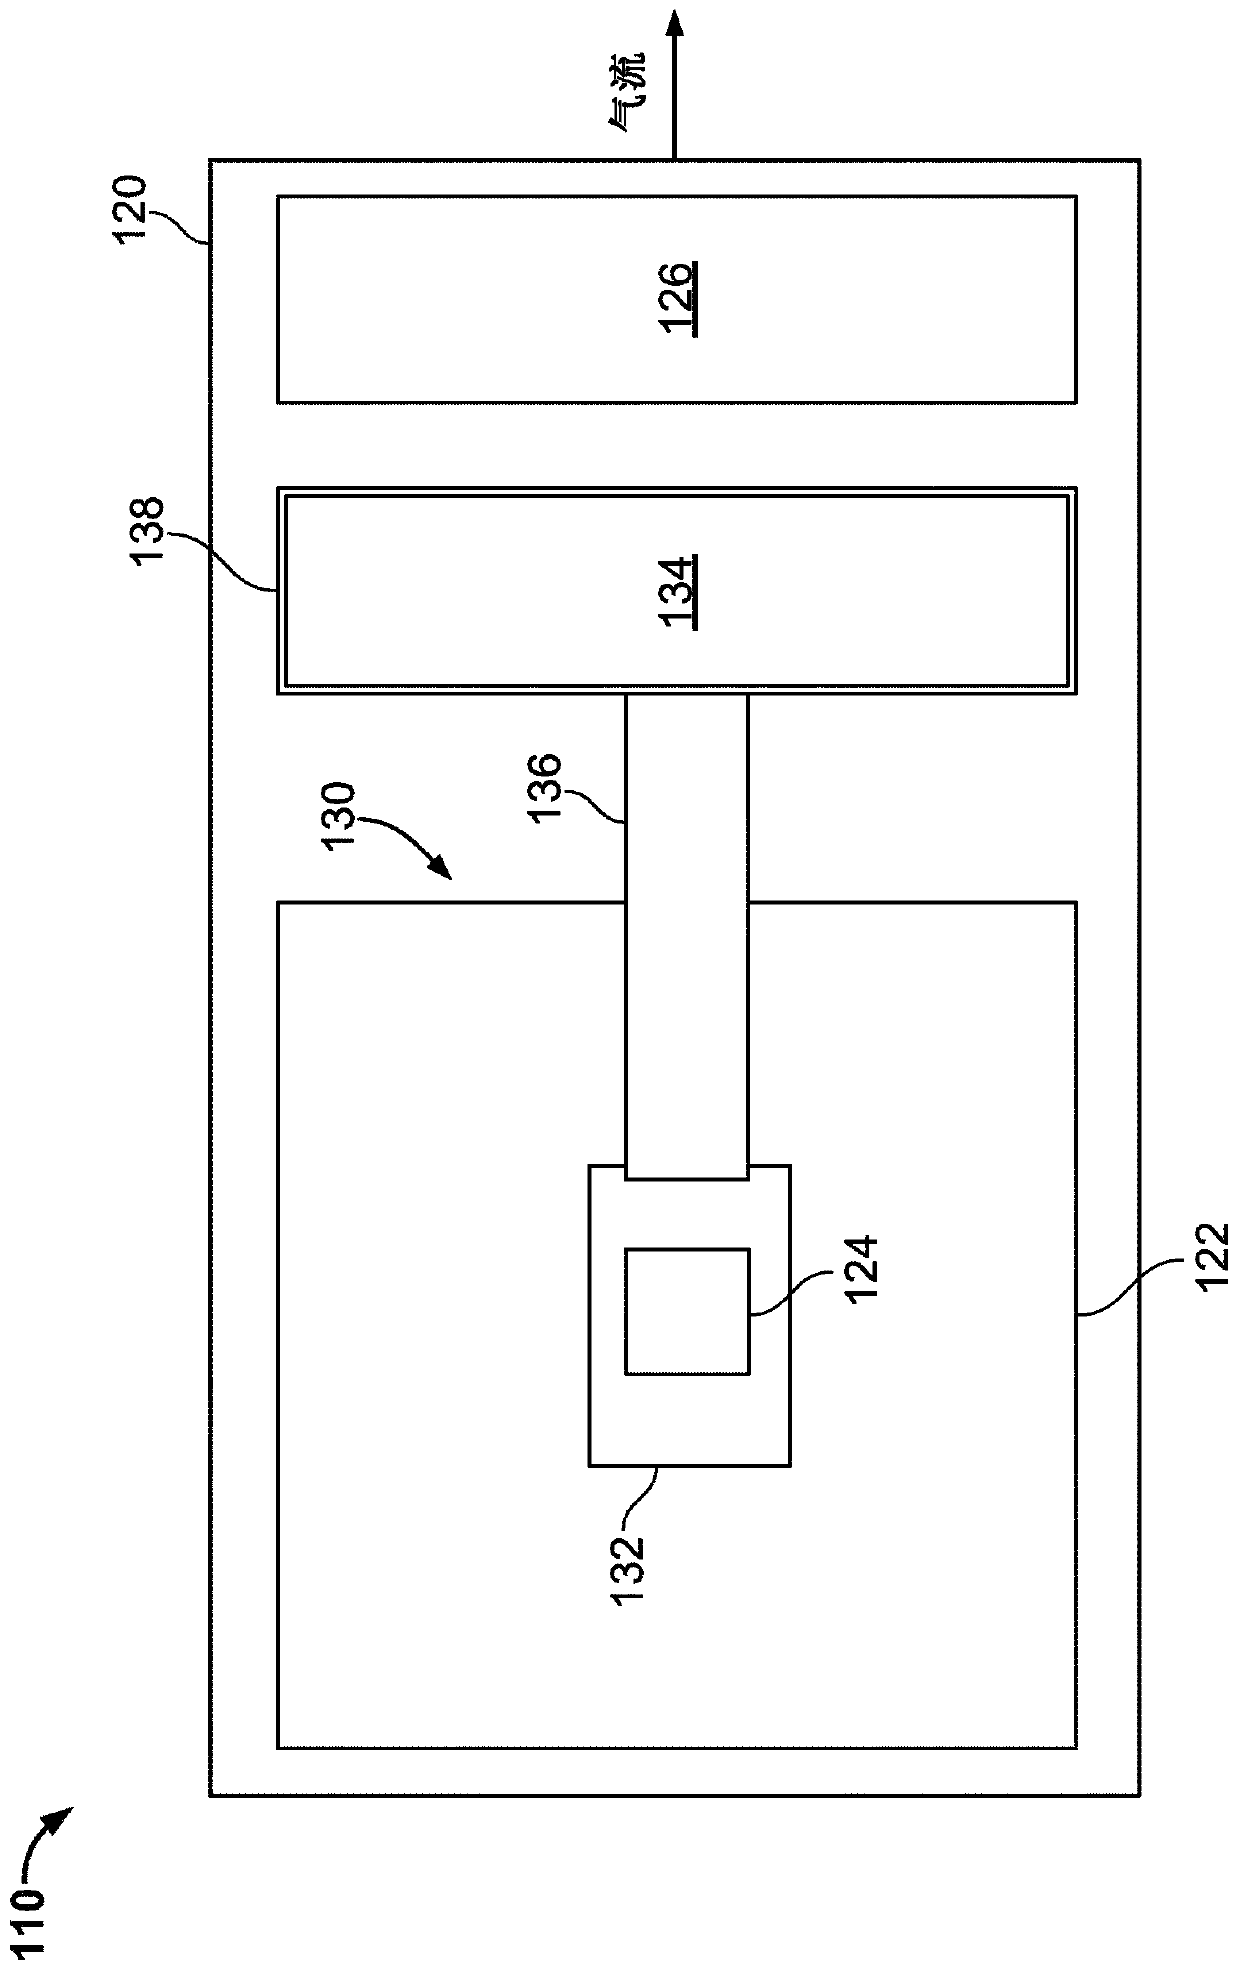 Systems and methods for cooling electronic equipment in a data center